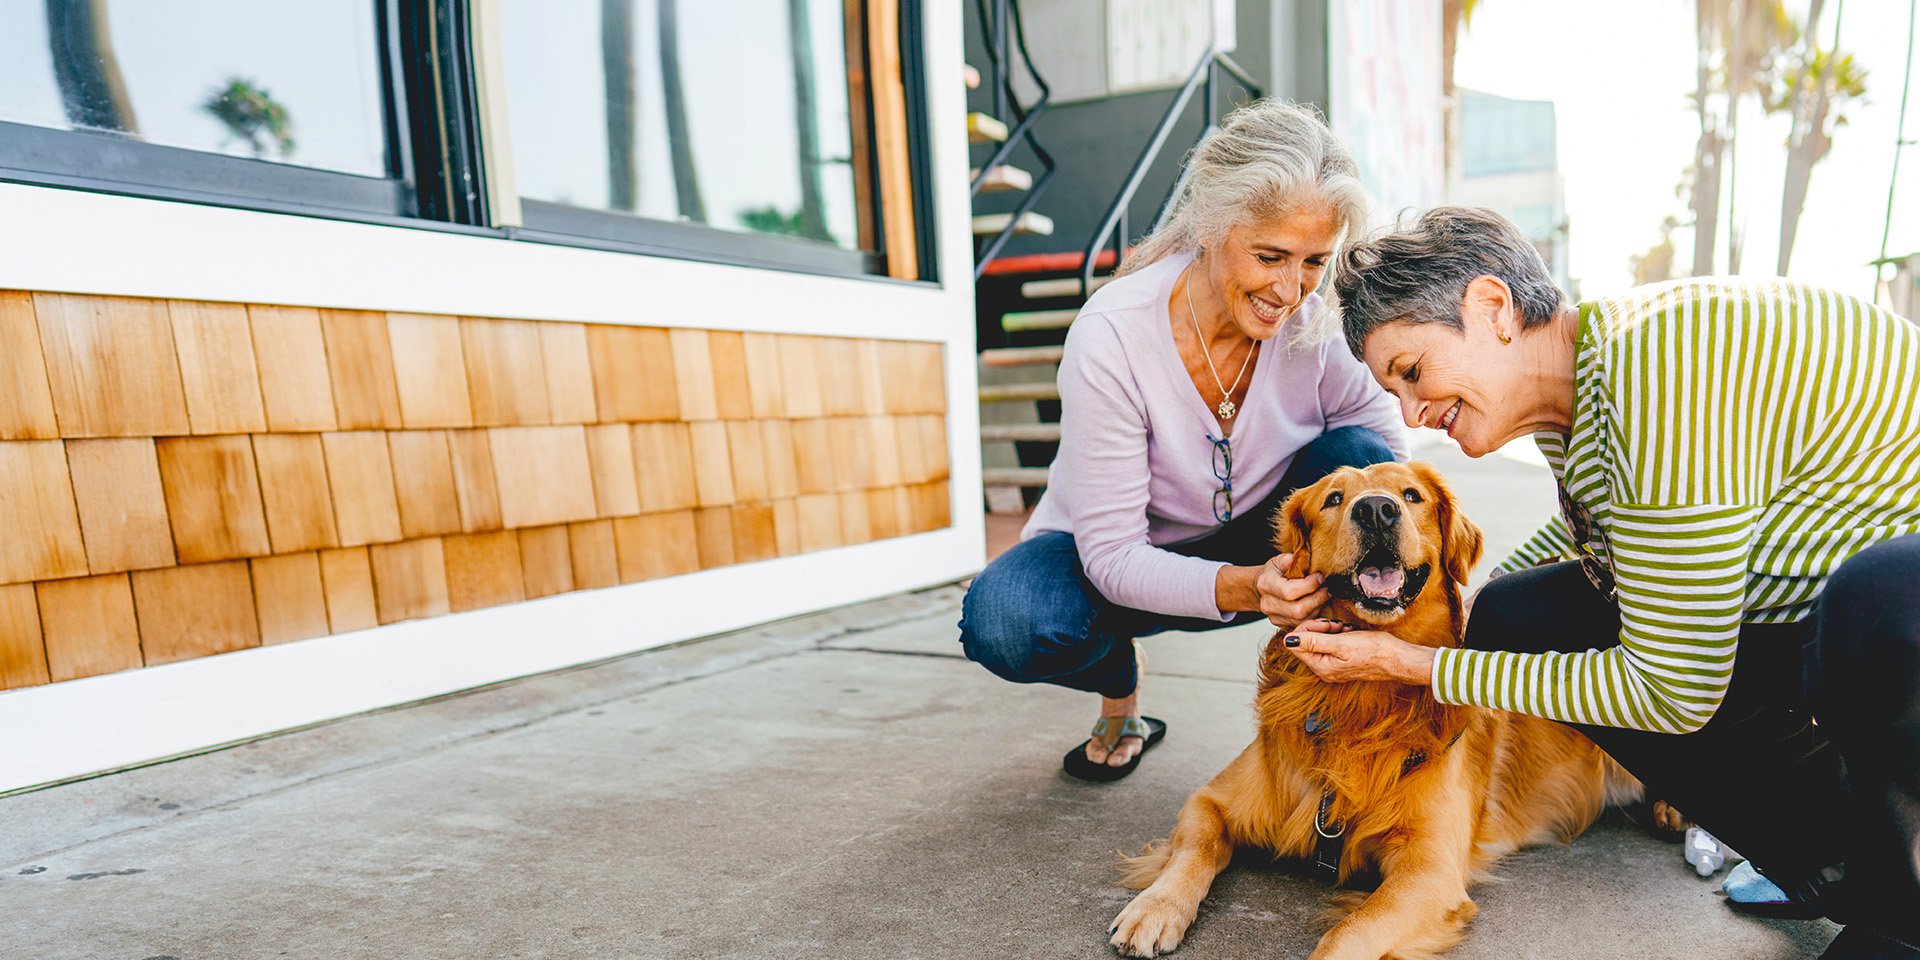 Two older ladies crouch down on the sidewalk in front of an apartment complex, tenderly petting a long-haired Labrador with affectionate smiles.